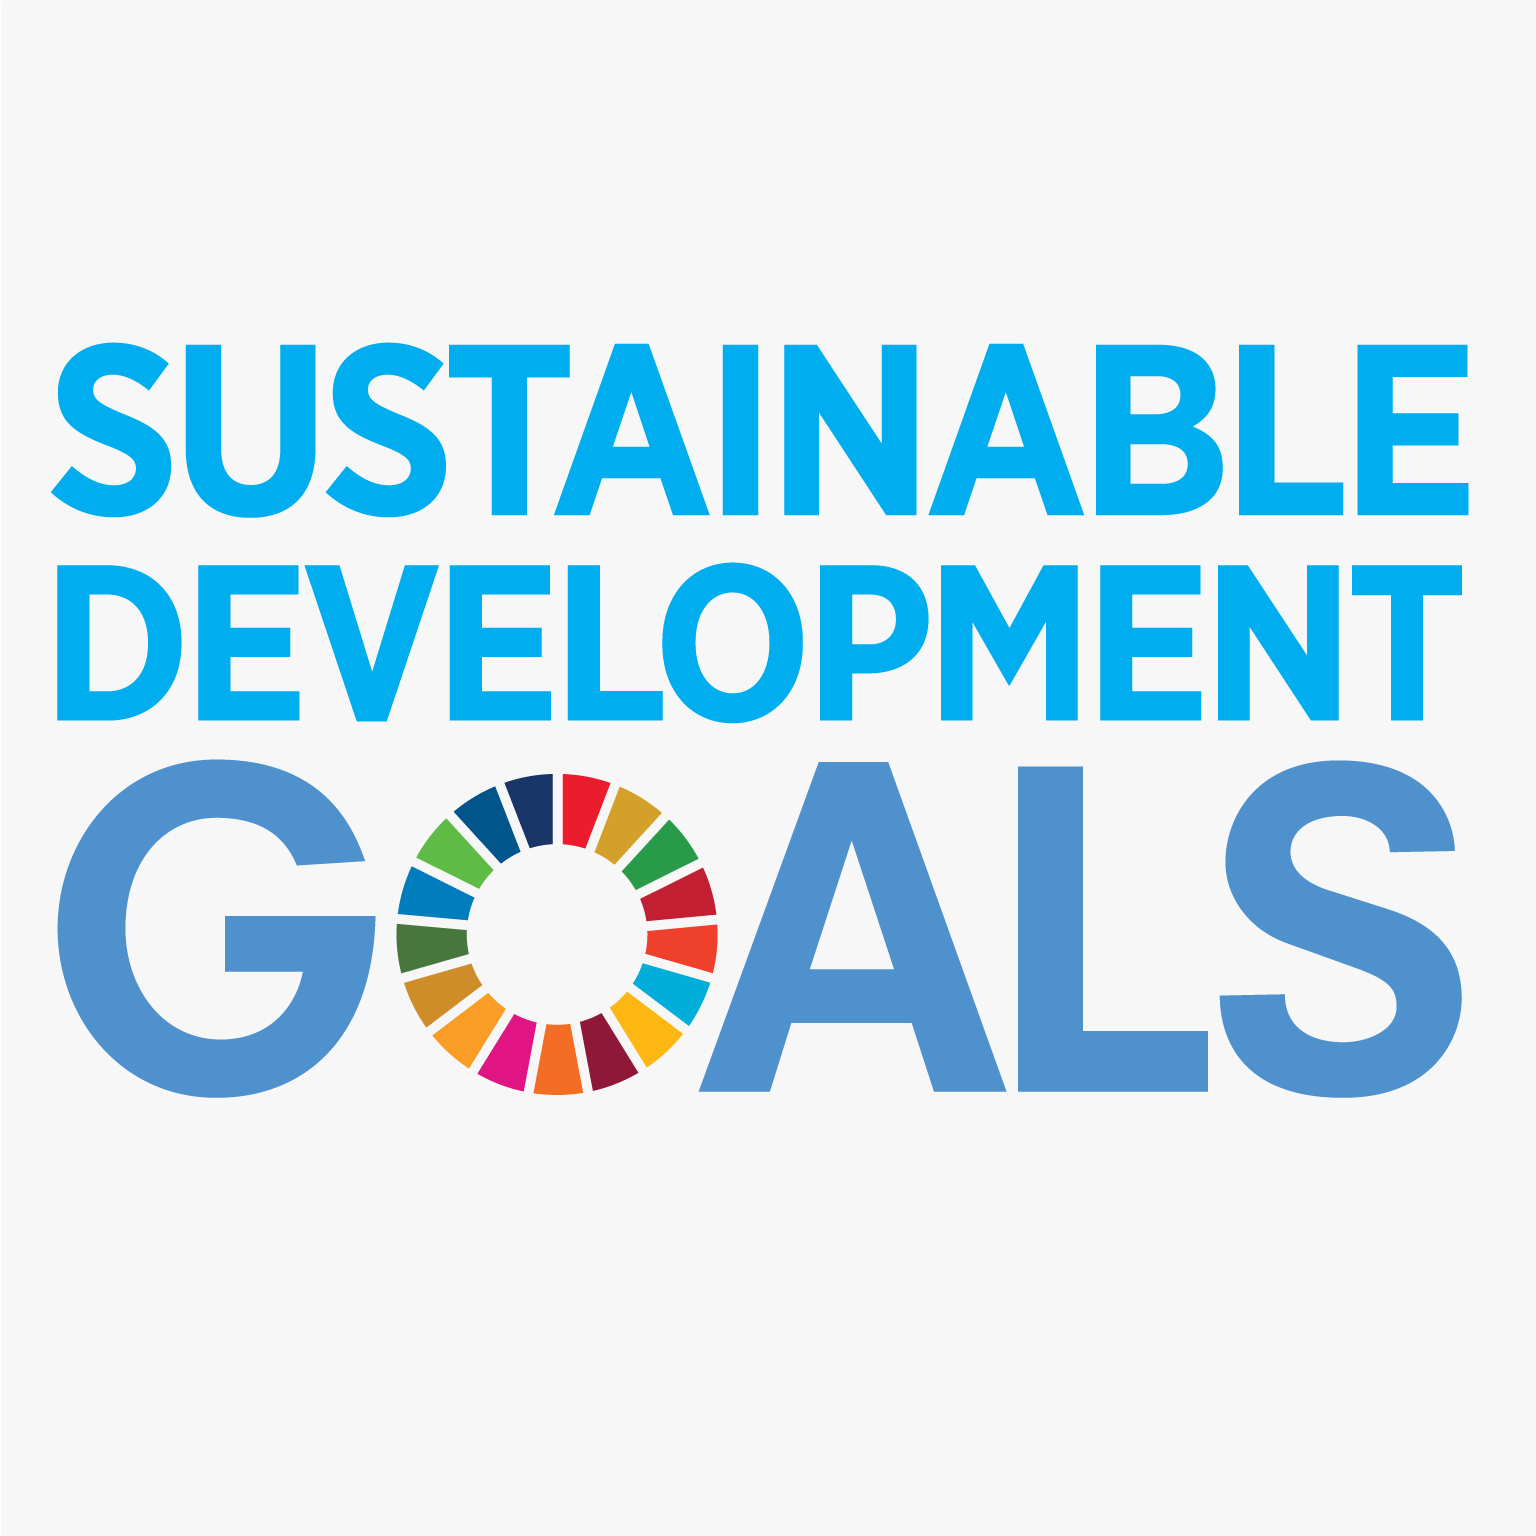 We helped to create an article on the SDGs for the education industry!